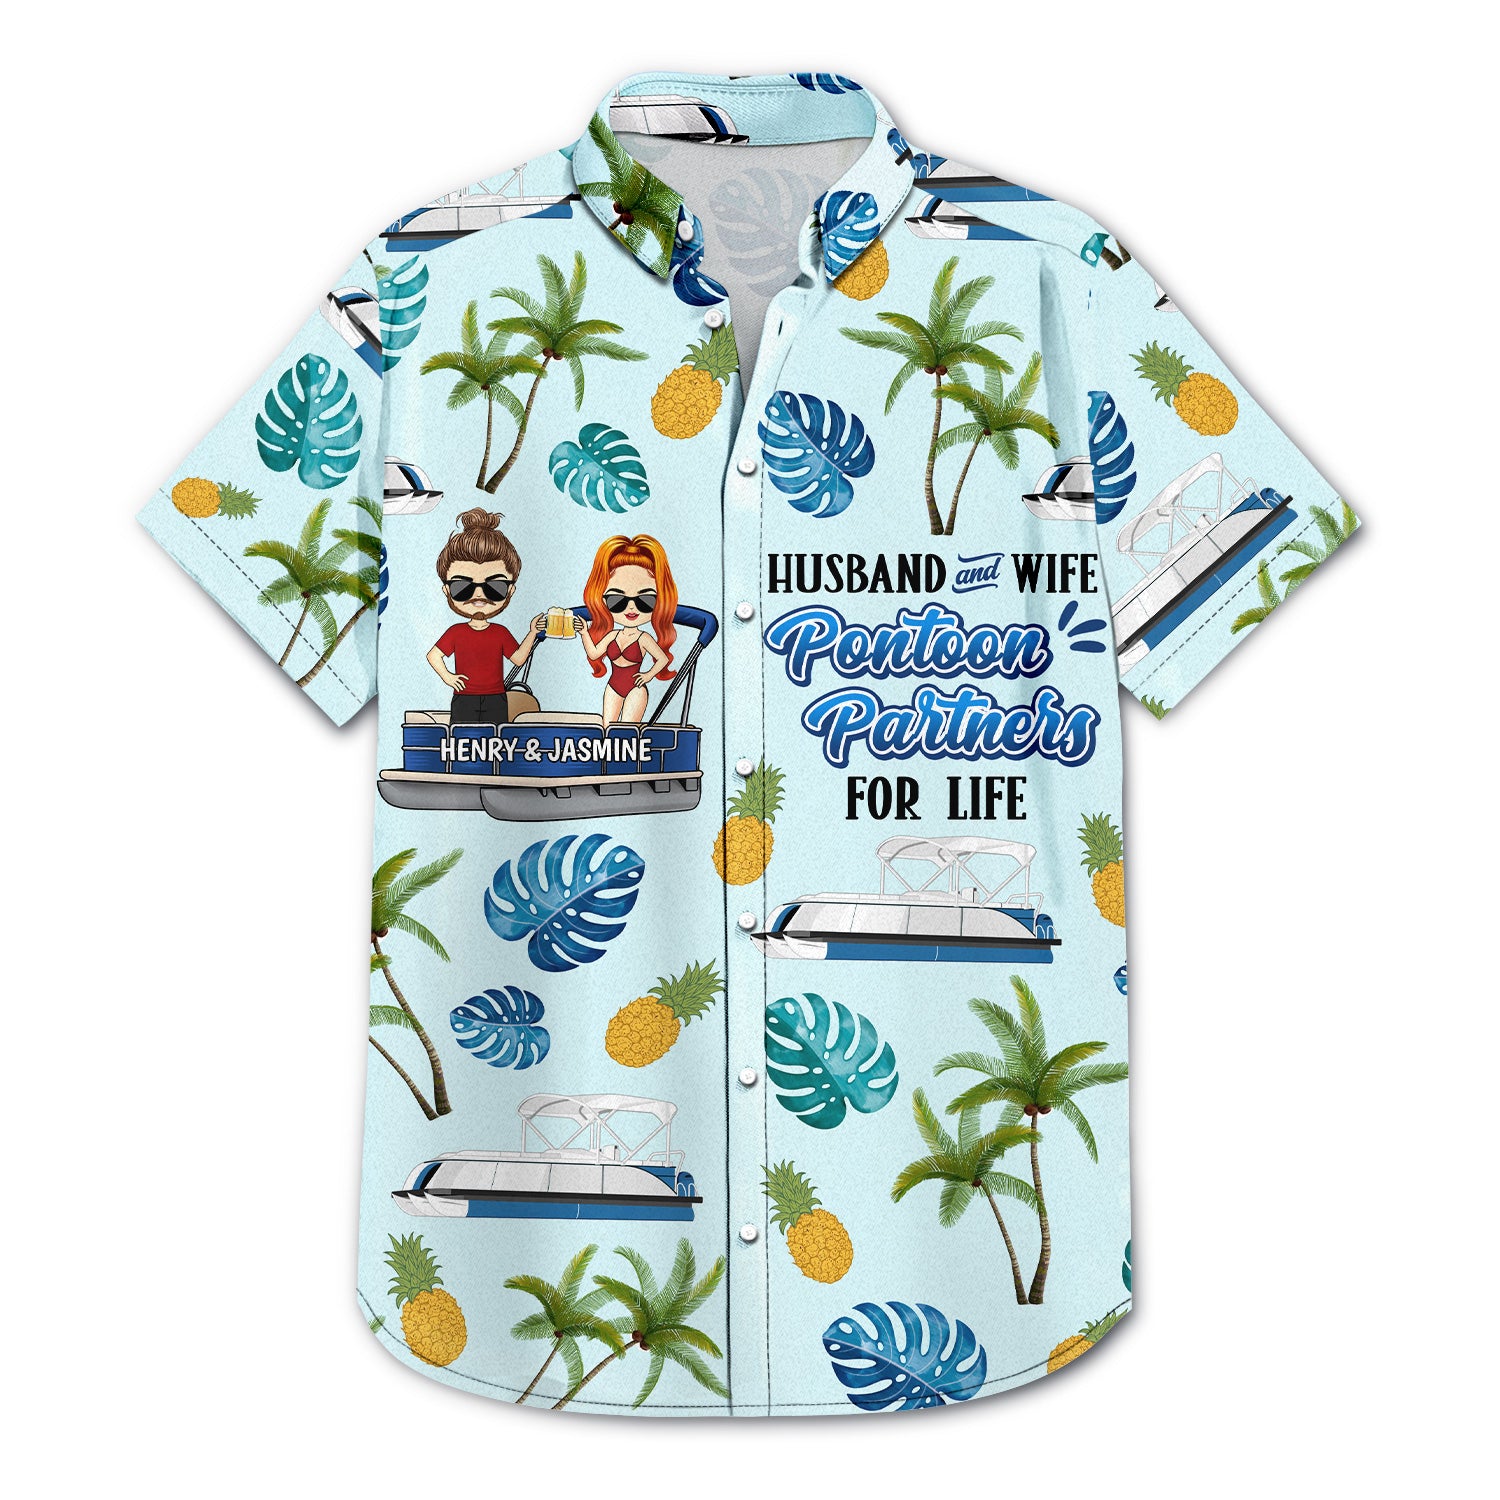 Pontoon Couple Partners For Life - Gift For Couples - Personalized Hawaiian Shirt